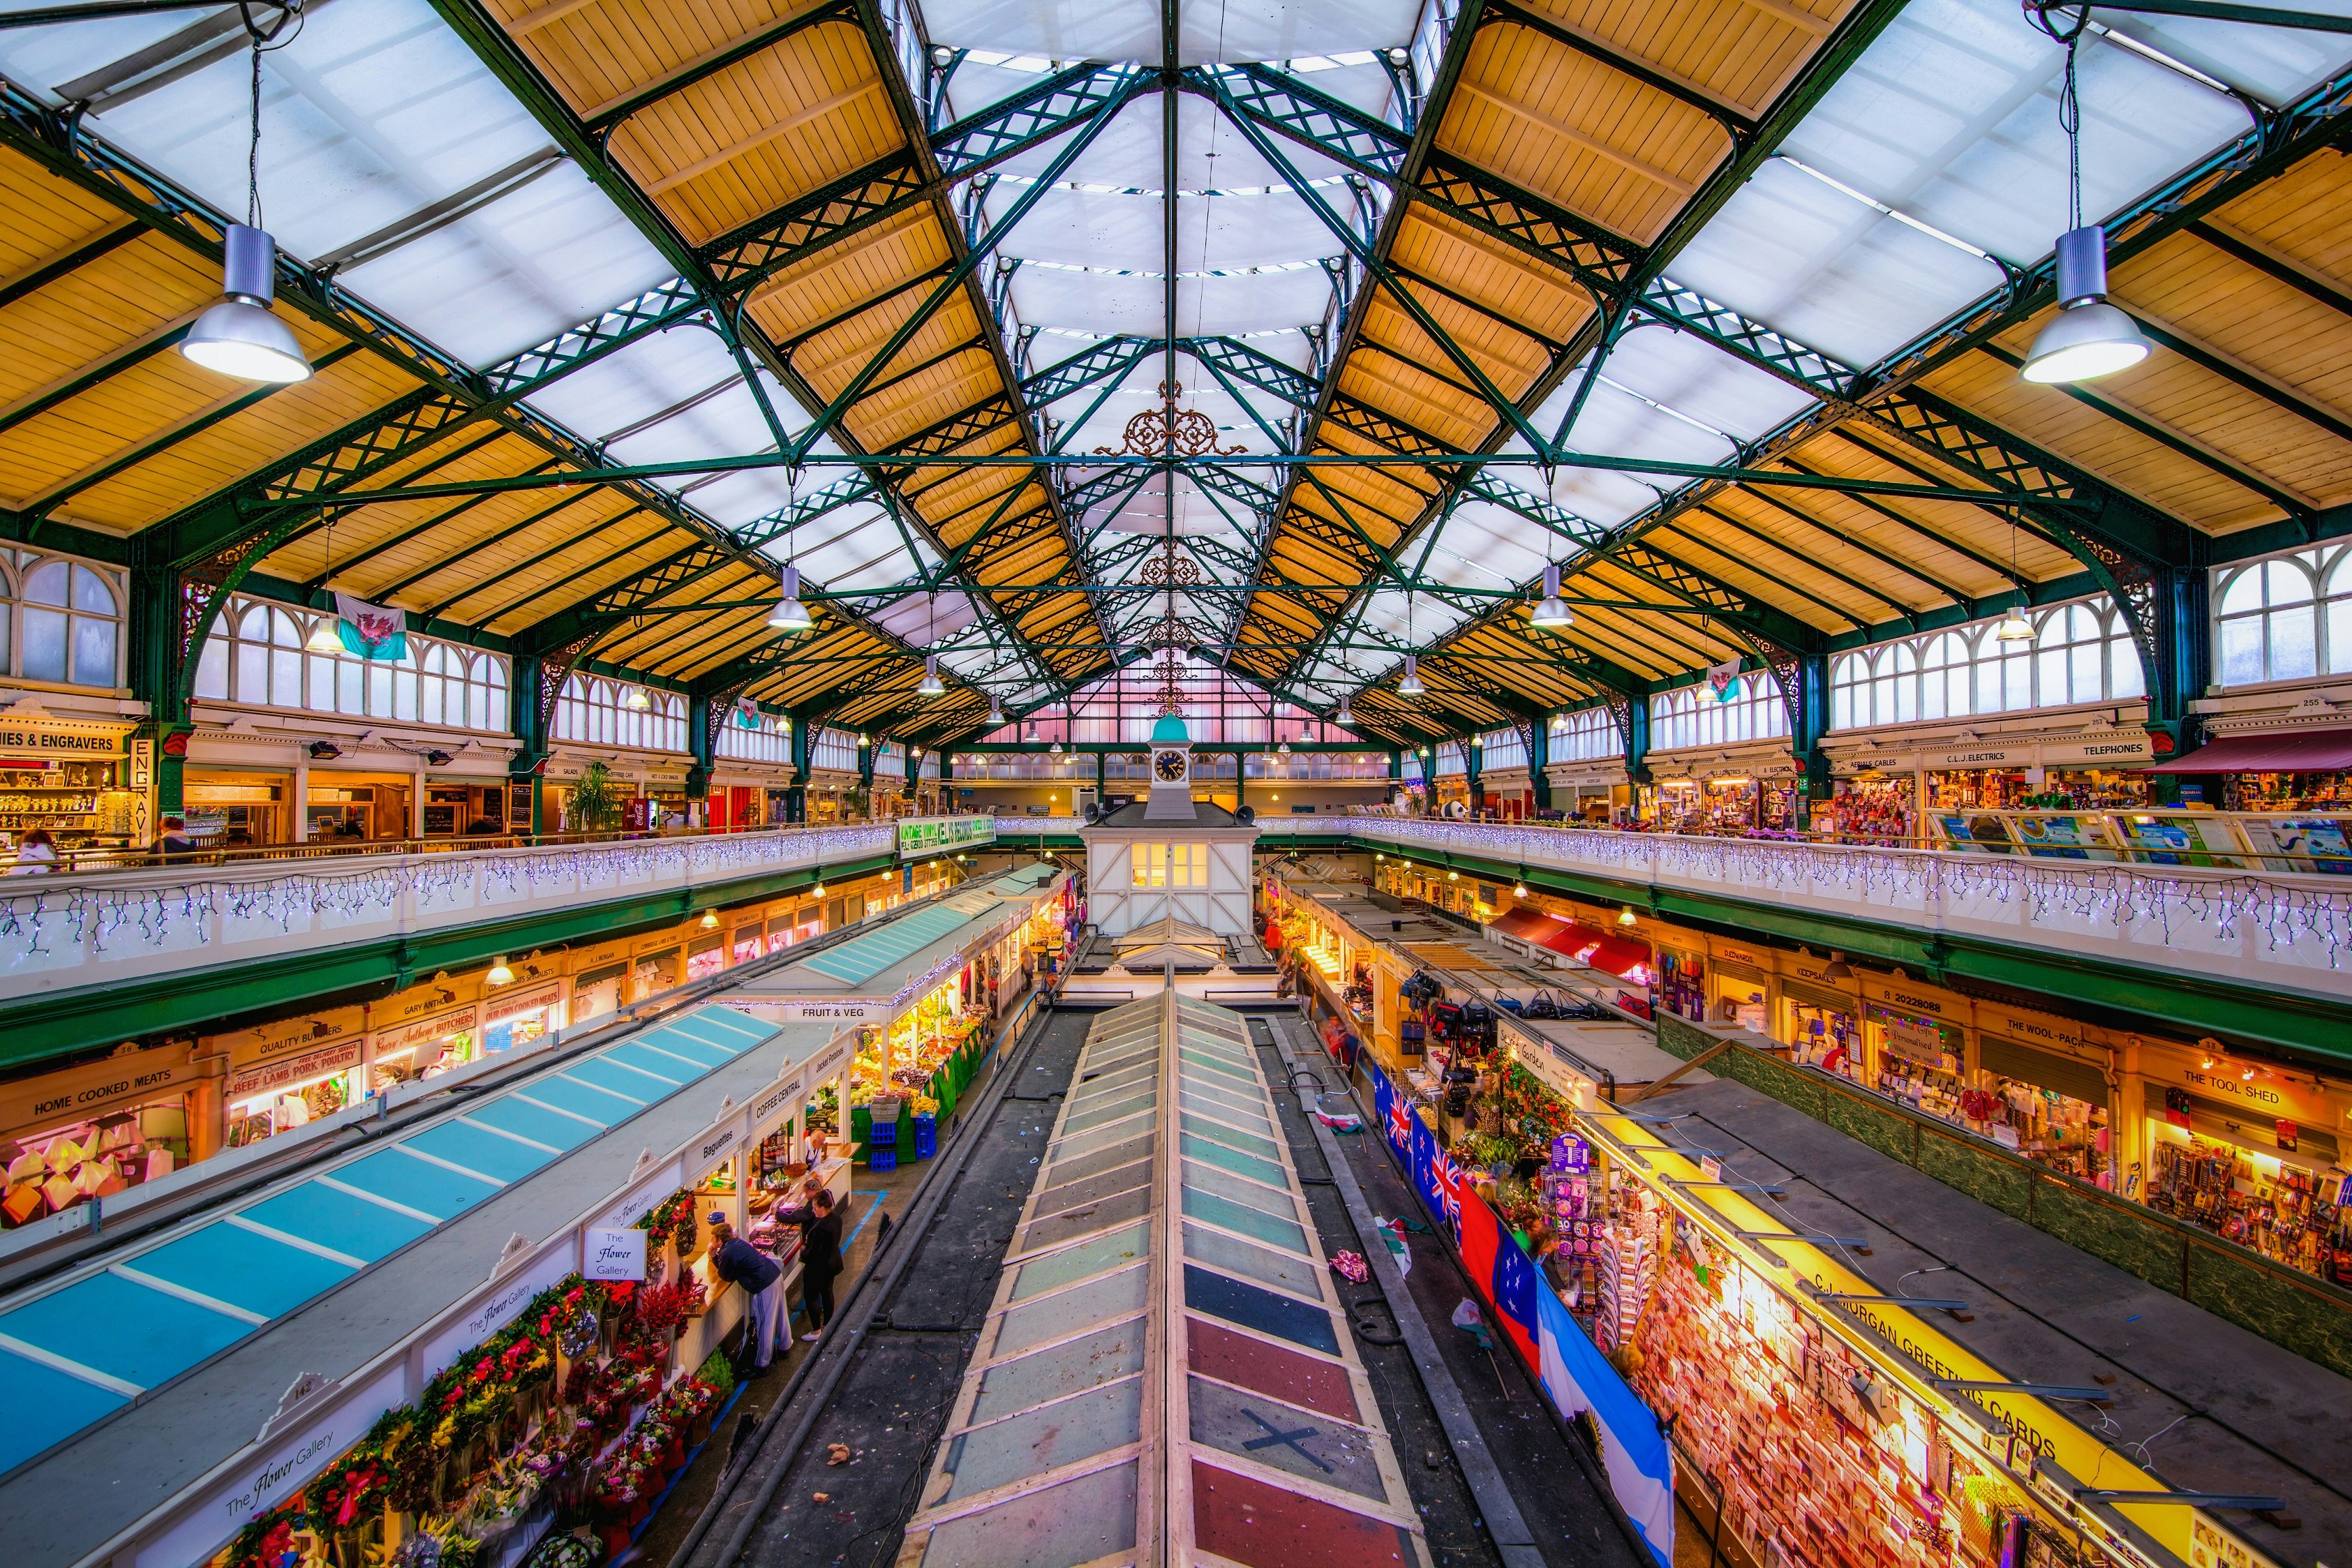 An aerial view of the interior of the indoor market in Cardiff, with two lines of stalls running down the centre of the building. Small shops and businesses also line the balcony on the building's second floor.